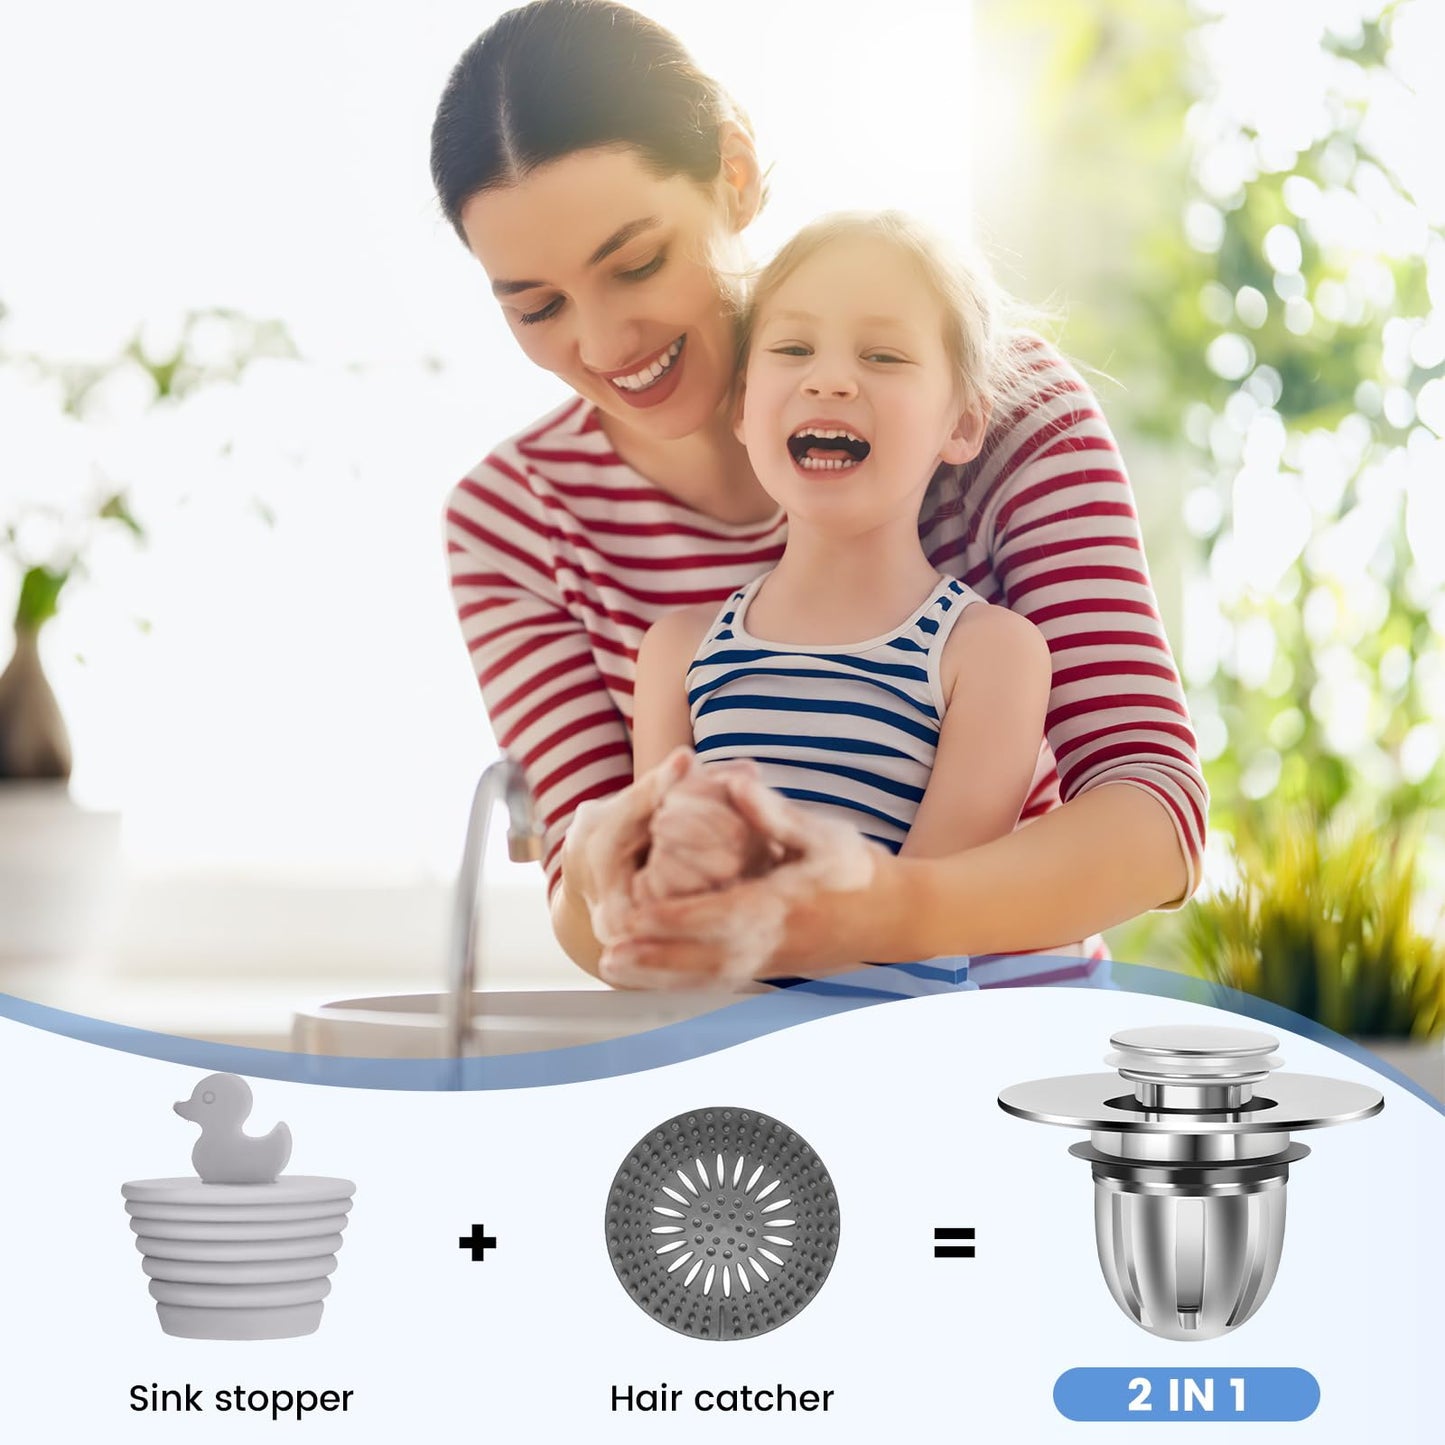 Weswose Universal 2-in-1 Magnetic Bathroom Sink Stopper and Drain Hair Catcher - Easy Install, Fits 1.22"-1.54" Drains, 2 Pcs Set